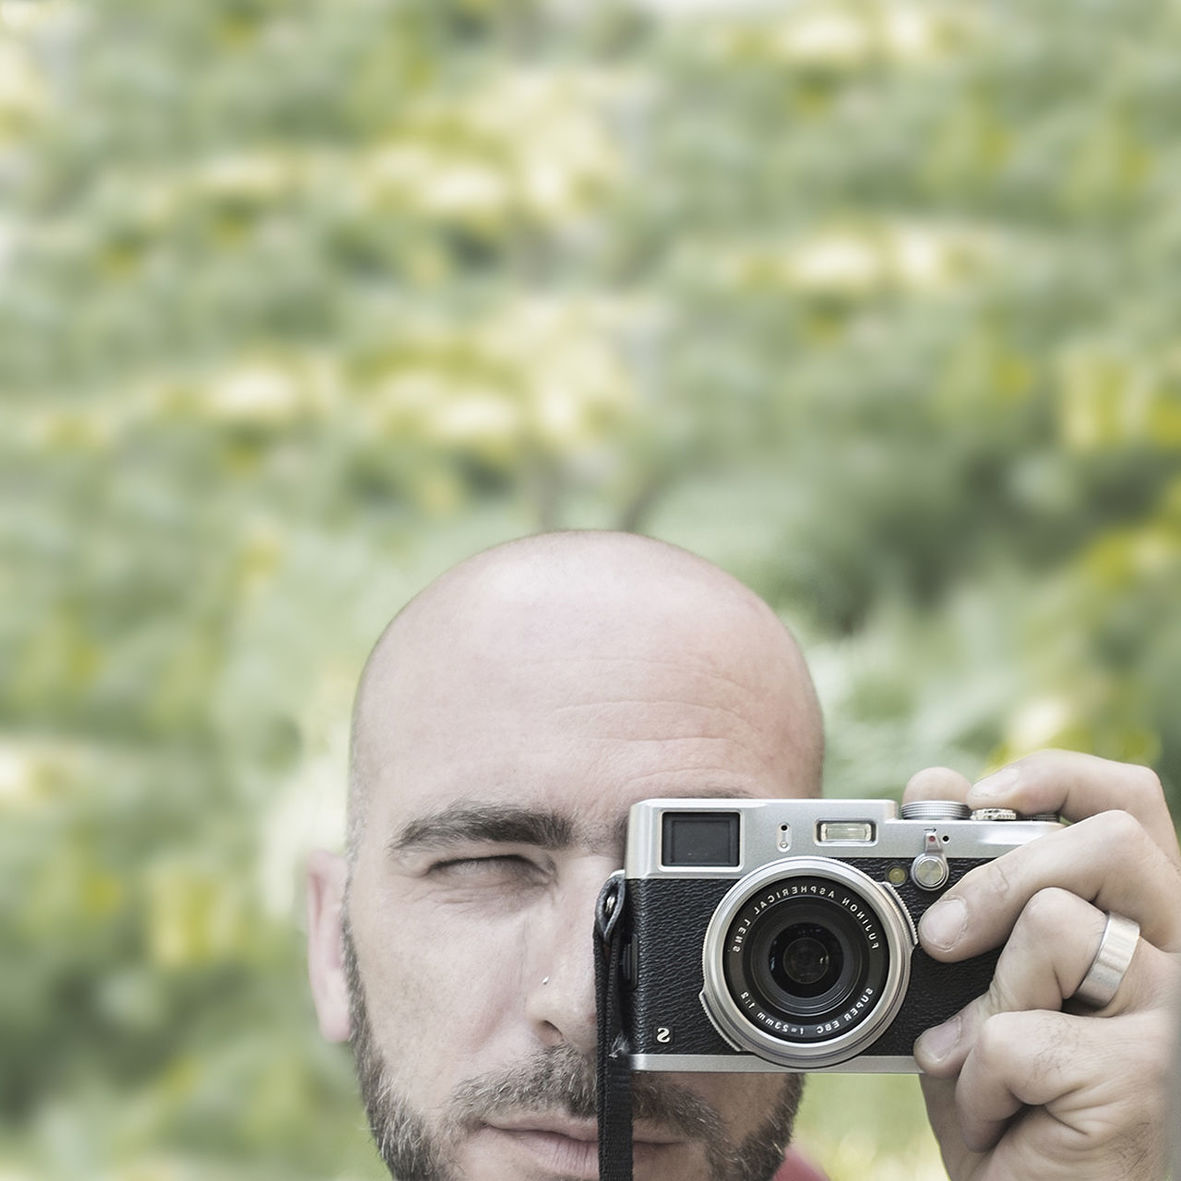 person, holding, photography themes, lifestyles, focus on foreground, close-up, part of, leisure activity, headshot, photographing, technology, cropped, men, camera - photographic equipment, communication, digital camera, human finger